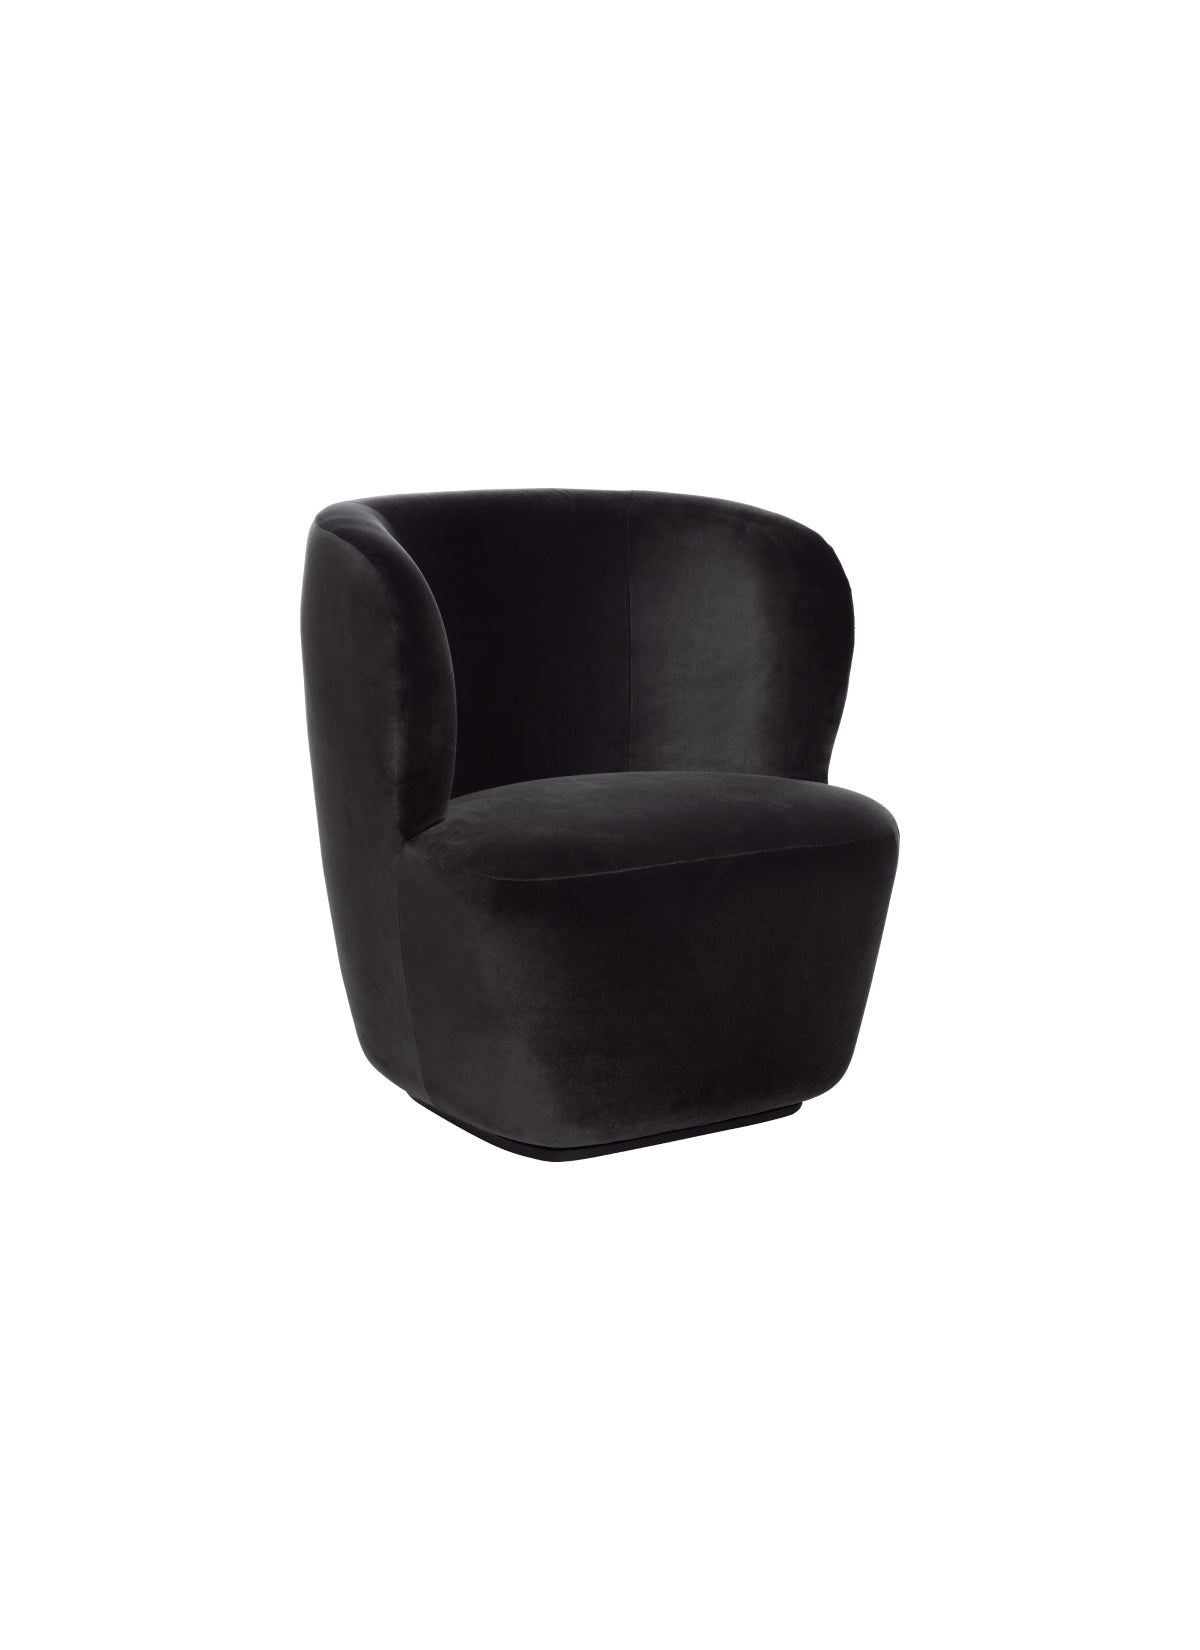 Stay Lounge Chair - Small - Returning Swivel by Gubi